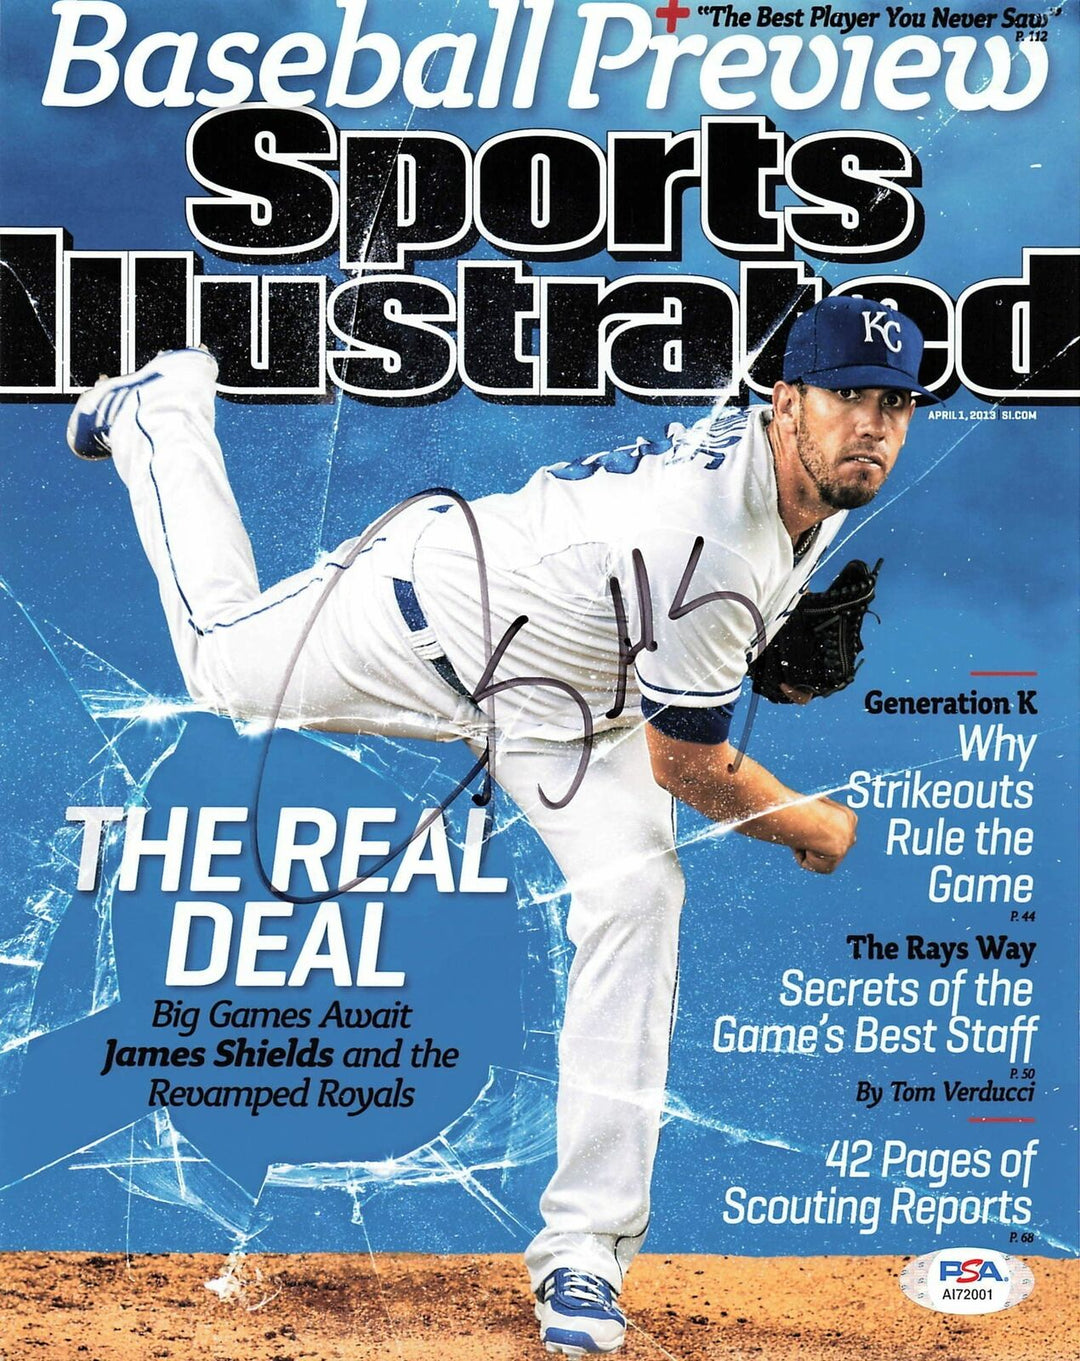 JAMES SHIELDS signed 8x10 photo PSA/DNA Autographed Tampa Bay Rays Image 1